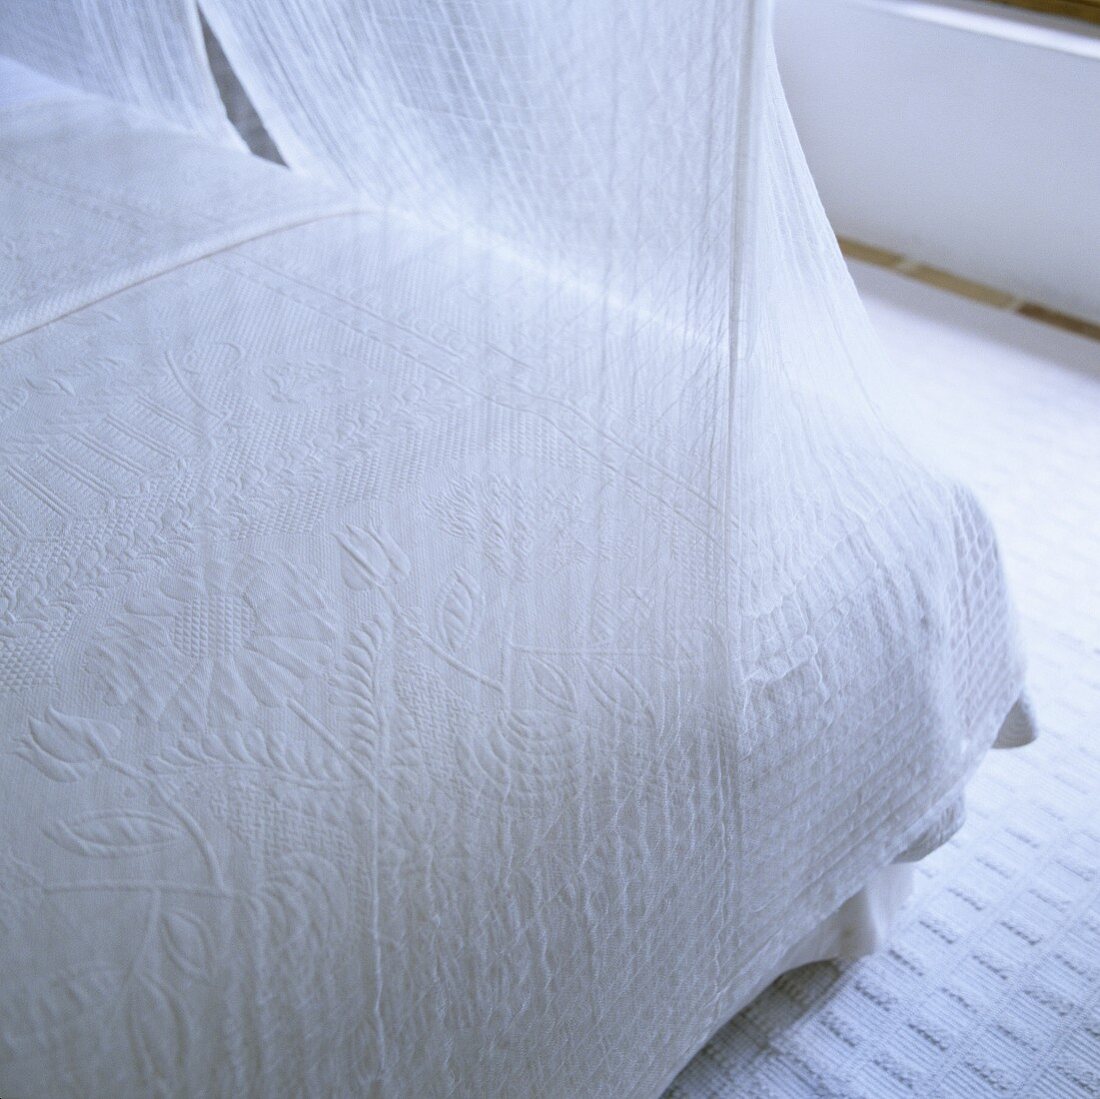 The corner of a bed with white airy fabric